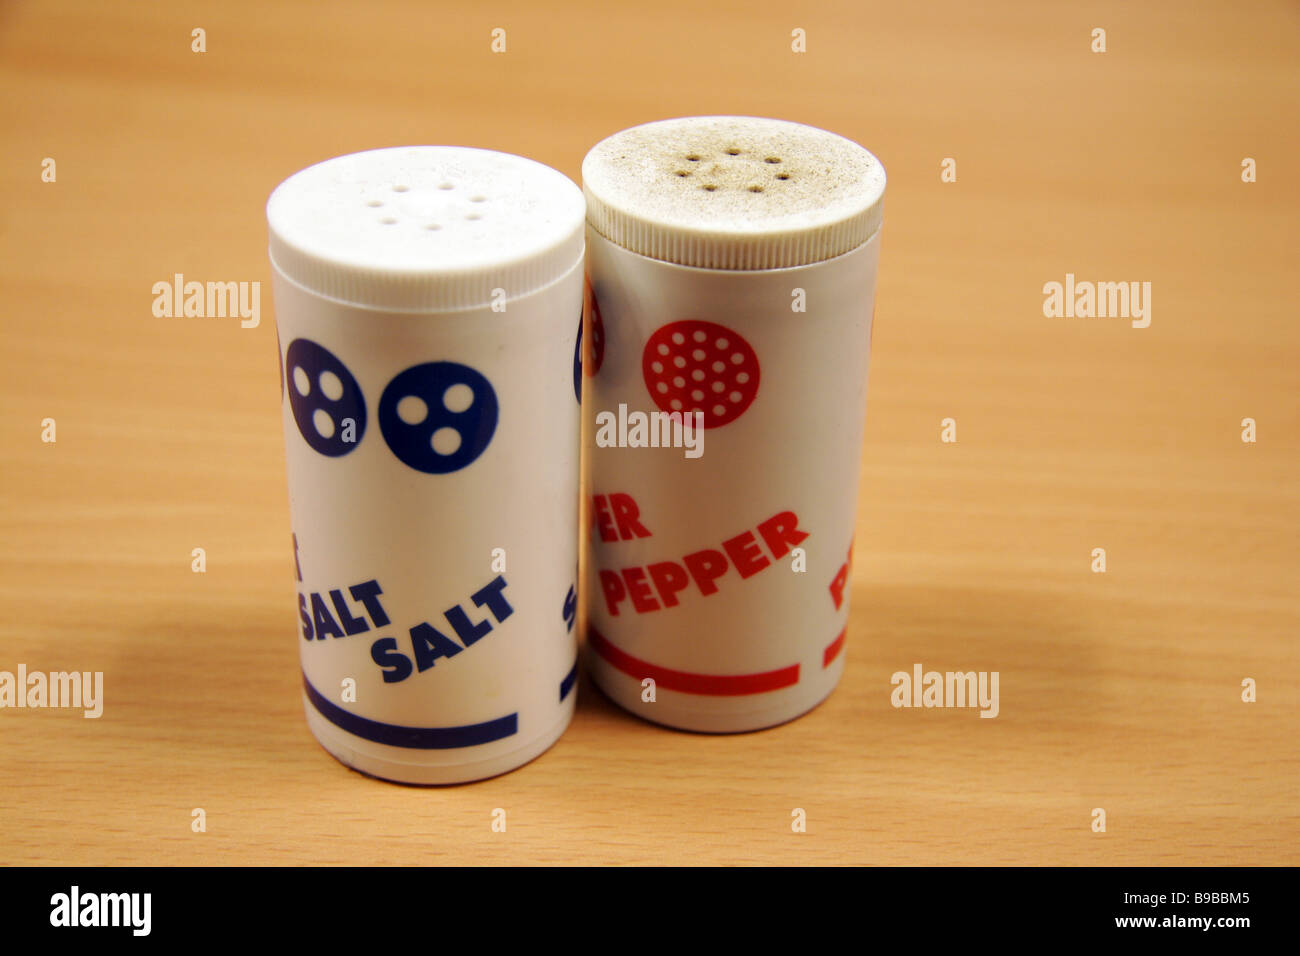 Salt and Pepper shakers Stock Photo